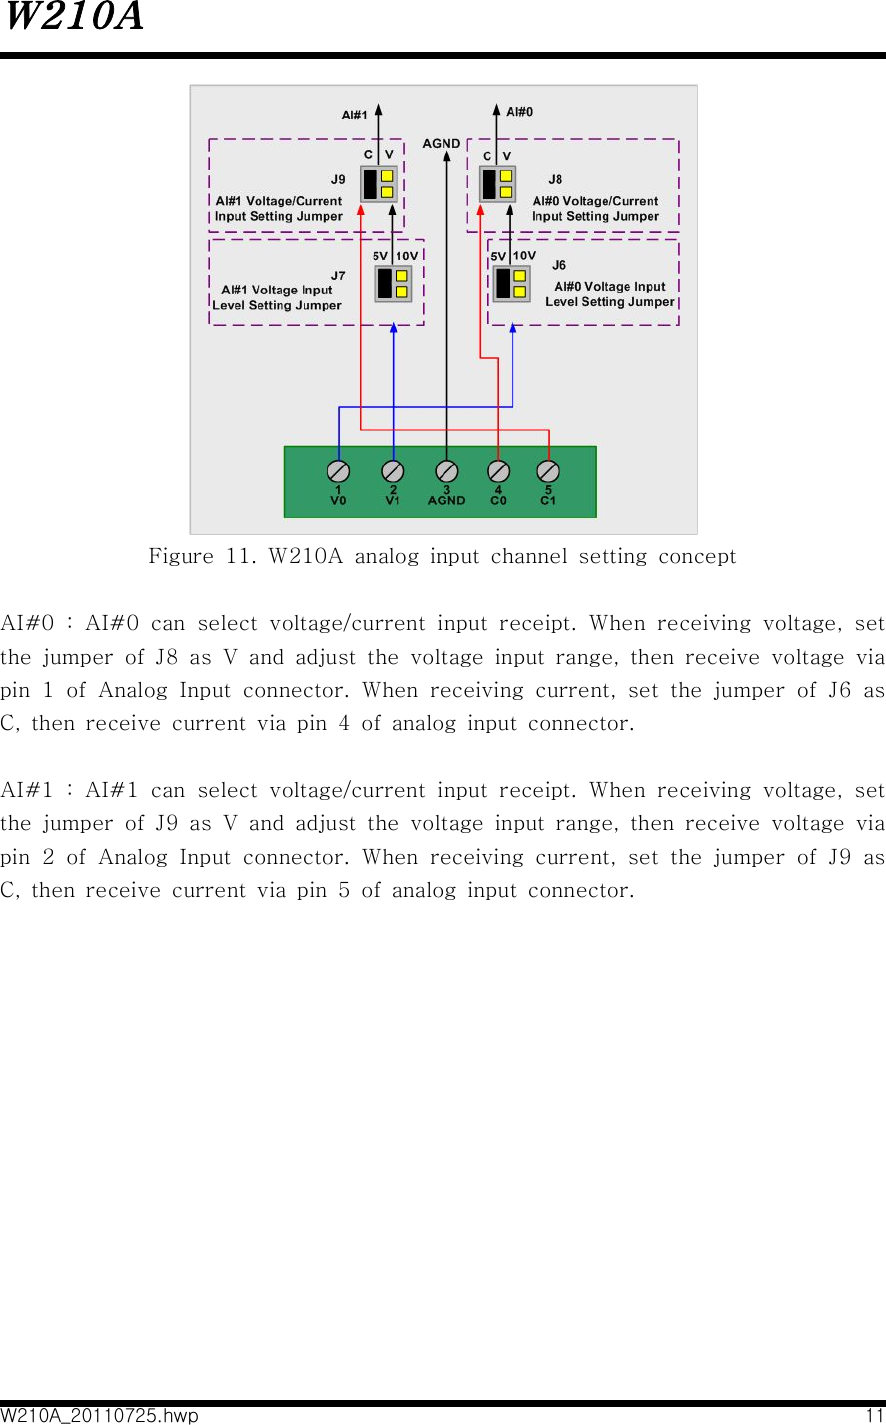 W210AW210A_20110725.hwp 11Figure  11.  W210A  analog  input  channel  setting  conceptAI#0  :  AI#0  can  select  voltage/current  input  receipt.  When  receiving  voltage,  set the  jumper  of  J8  as  V  and  adjust  the  voltage  input  range,  then  receive  voltage  via pin  1  of  Analog  Input  connector.  When  receiving  current,  set  the  jumper  of  J6  as C,  then  receive  current  via  pin  4  of  analog  input  connector.AI#1  :  AI#1  can  select  voltage/current  input  receipt.  When  receiving  voltage,  set the  jumper  of  J9  as  V  and  adjust  the  voltage  input  range,  then  receive  voltage  via pin  2  of  Analog  Input  connector.  When  receiving  current,  set  the  jumper  of  J9  as C,  then  receive  current  via  pin  5  of  analog  input  connector.